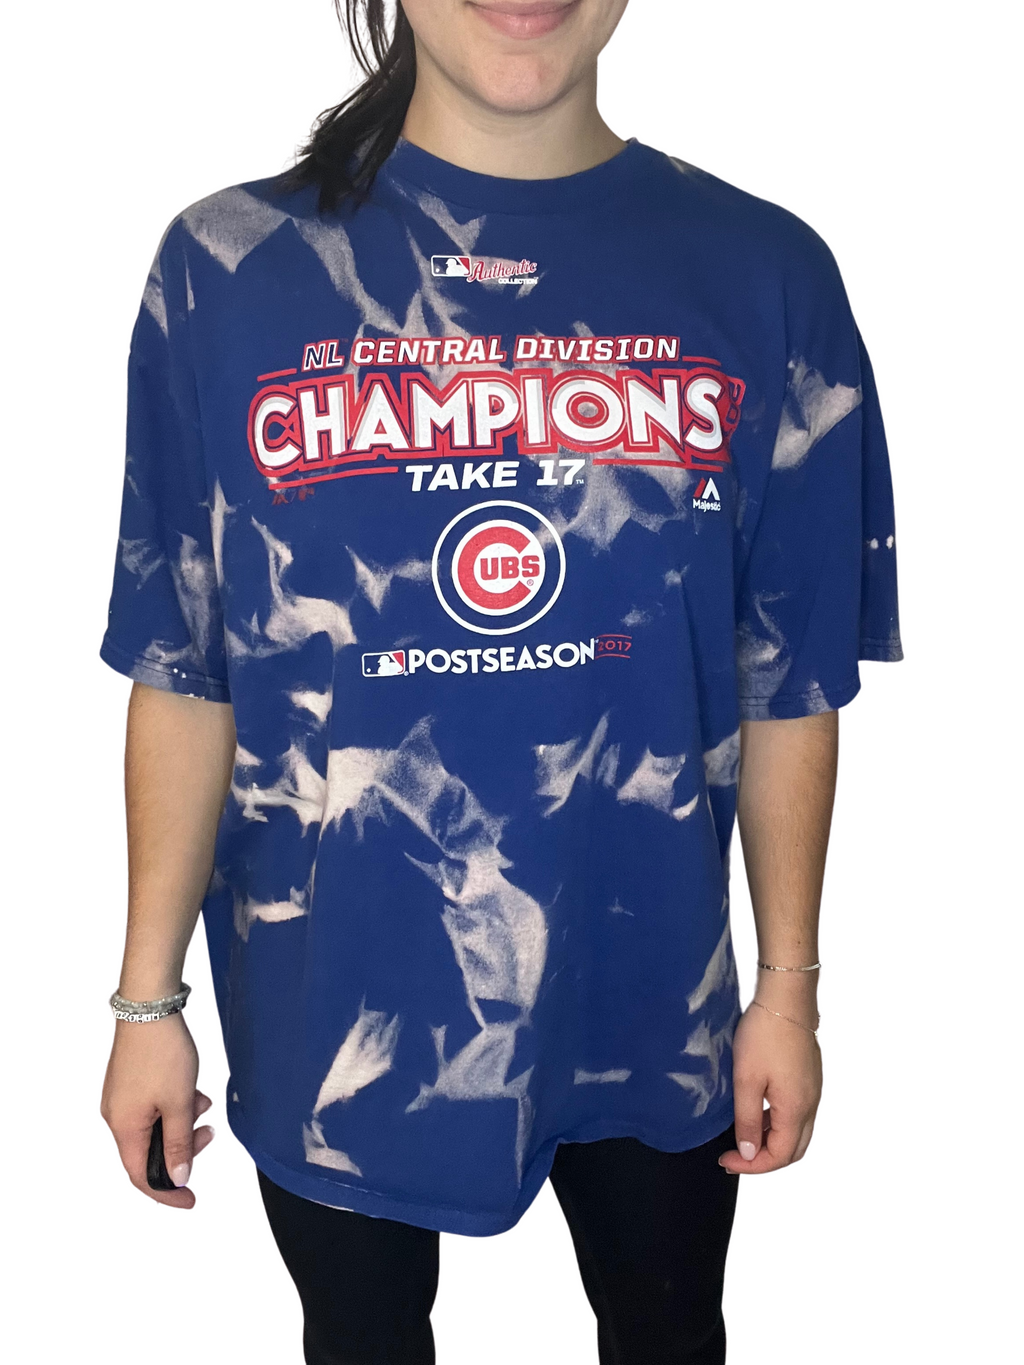 Chicago Cubs NL Central 2017 Champions Shirt